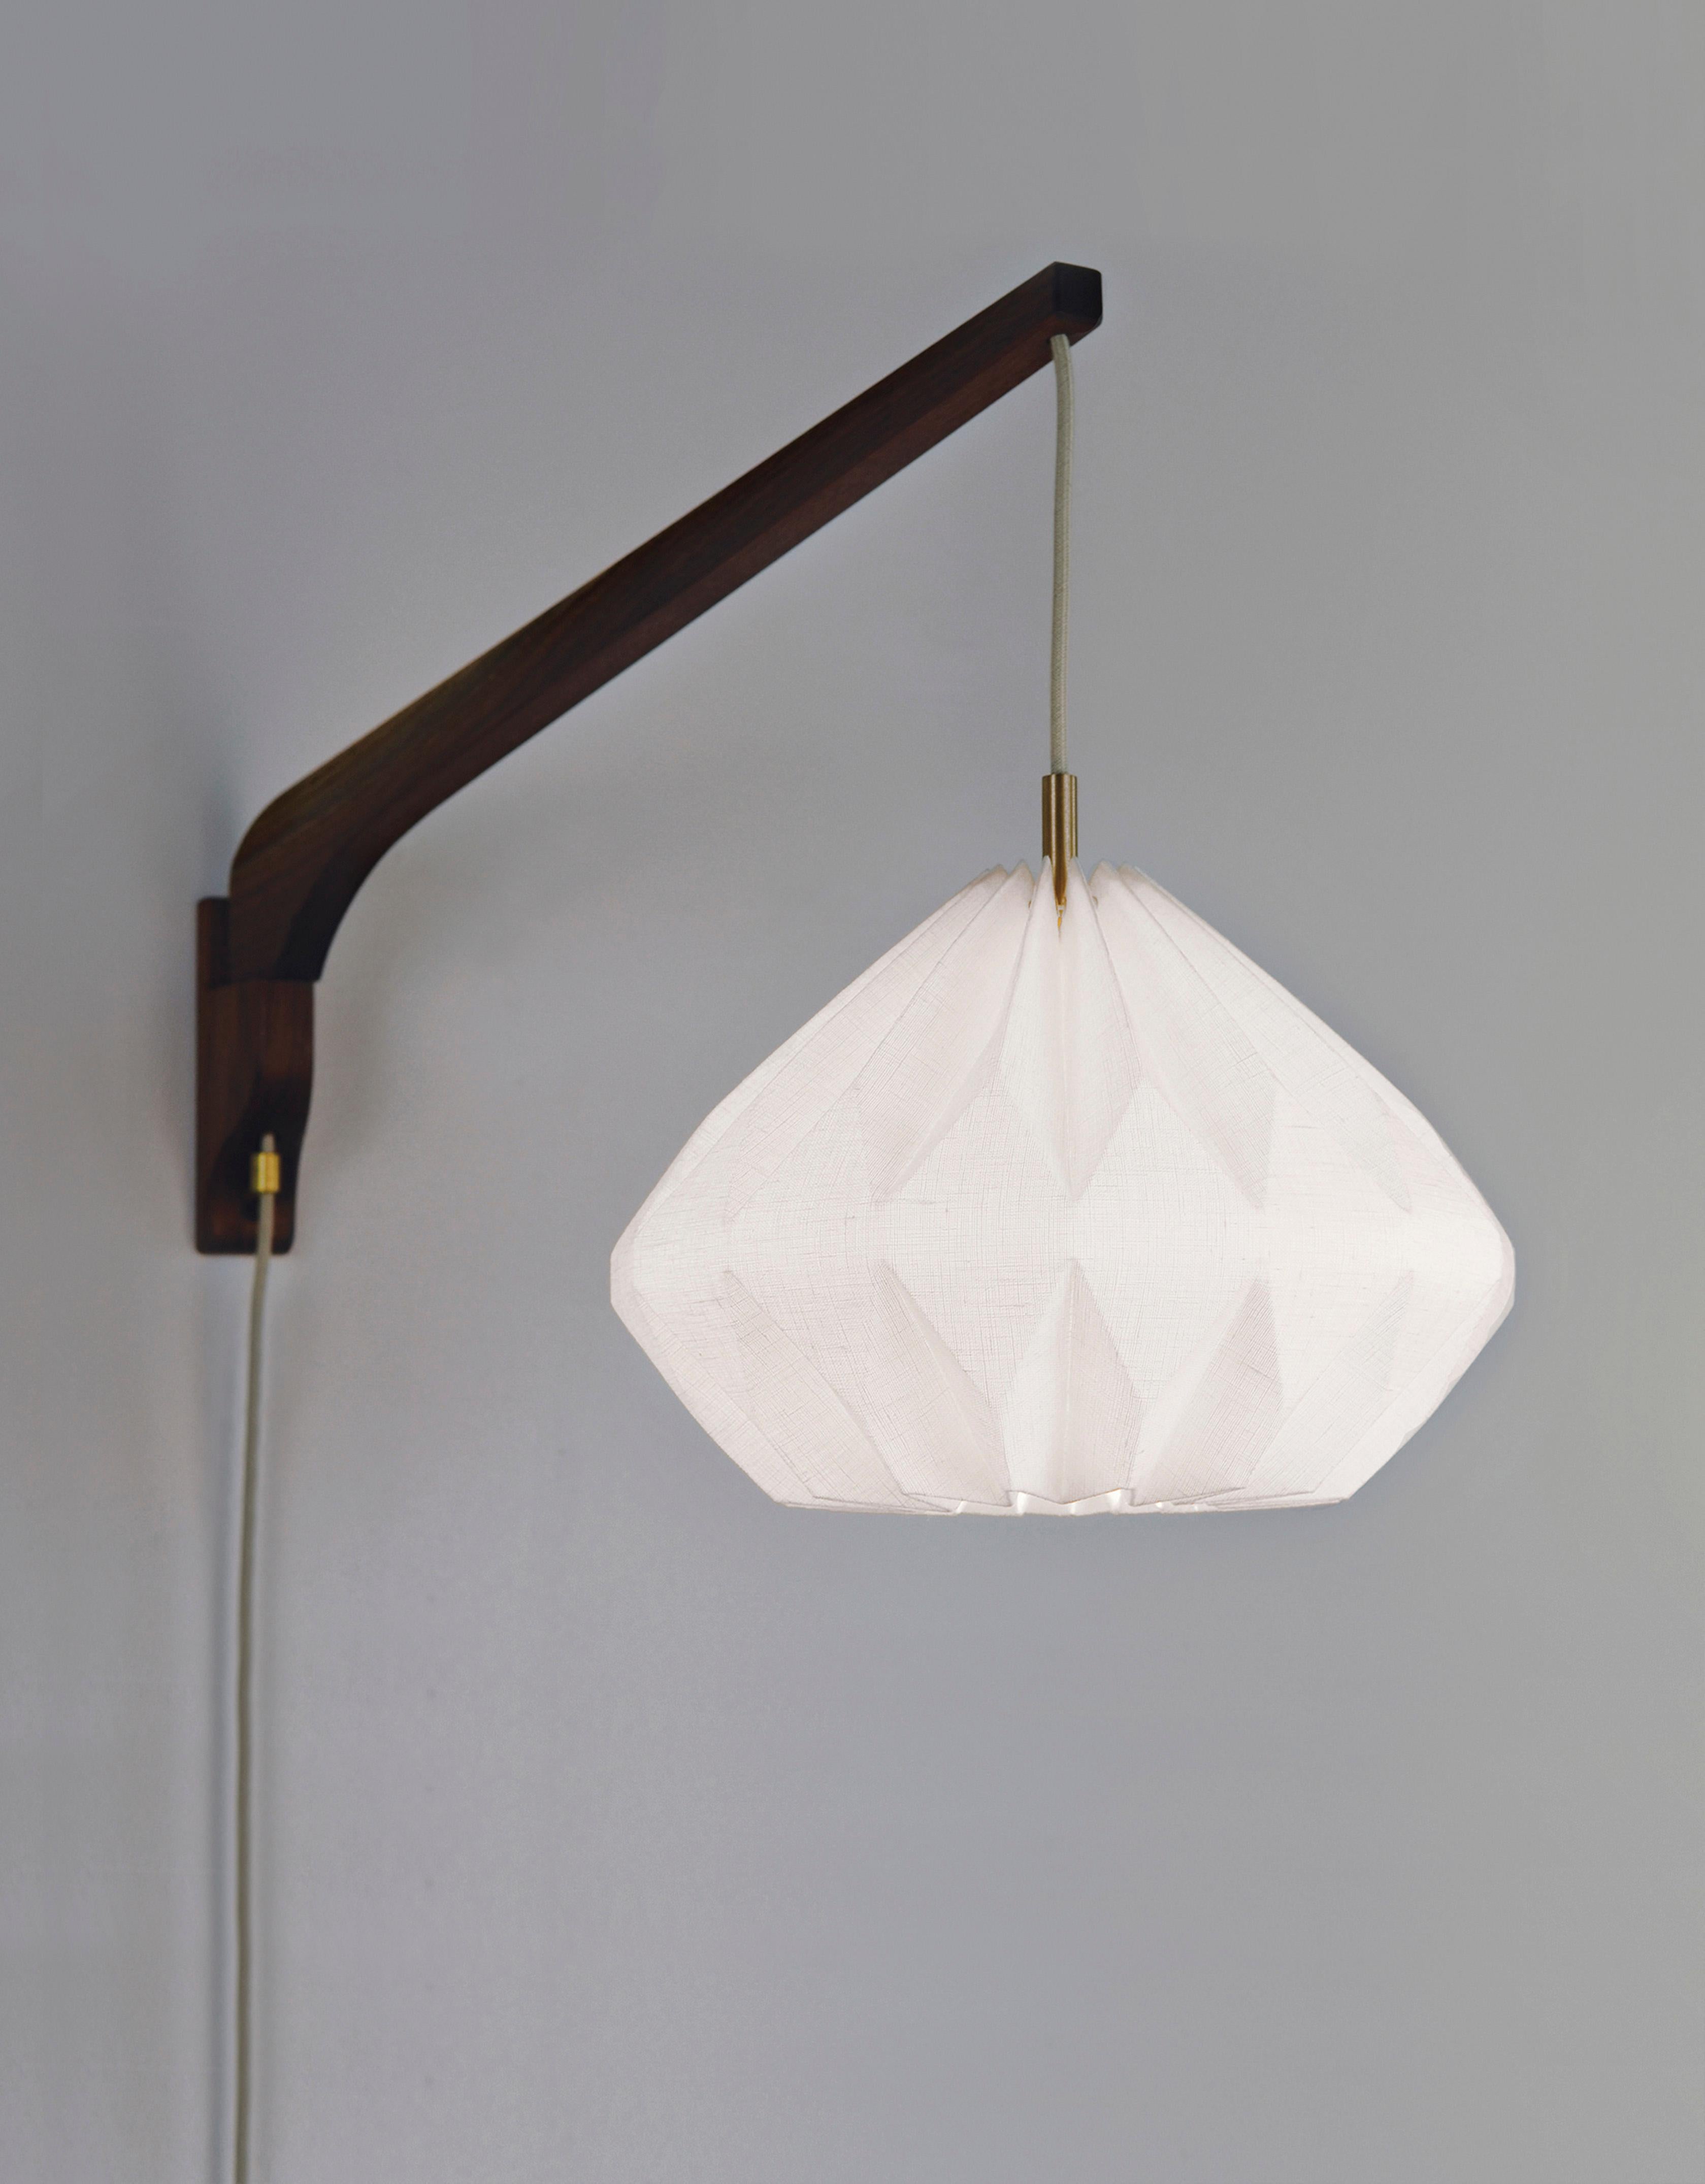 Made of a linen shade with a beautifully handcrafted wooden swing arm, this Mid-Century style wall lamp will bring to your interior an interesting and functional work of art. The origami-inspired shade has an open bottom that provides an extra flow